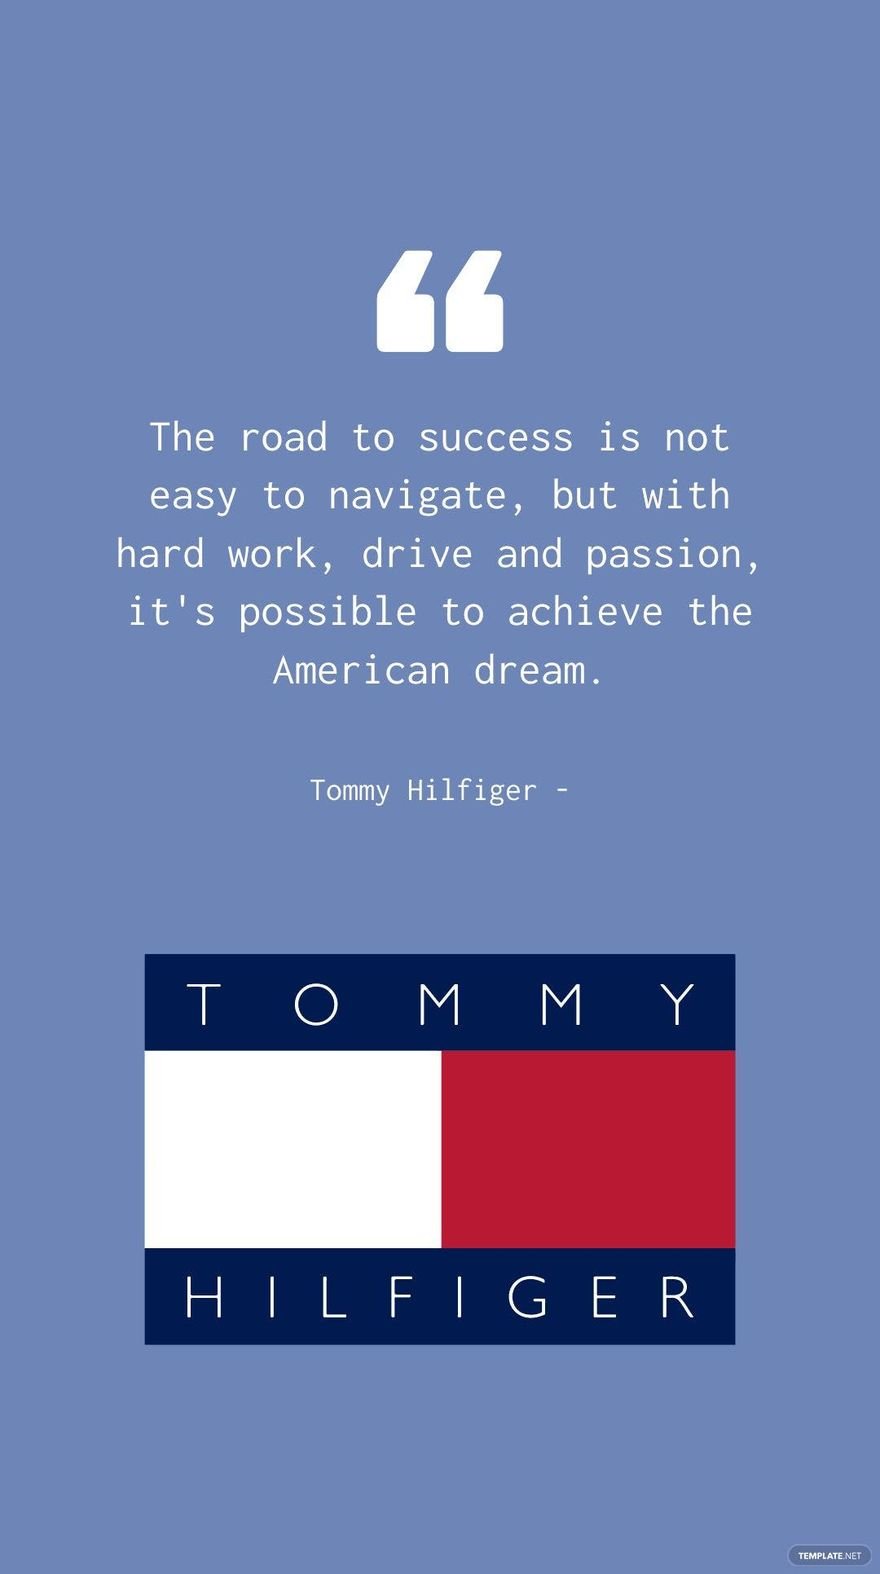 Tommy Hilfiger - The road to success is not easy to navigate, but with hard work, drive and passion, it's possible to achieve the American dream.